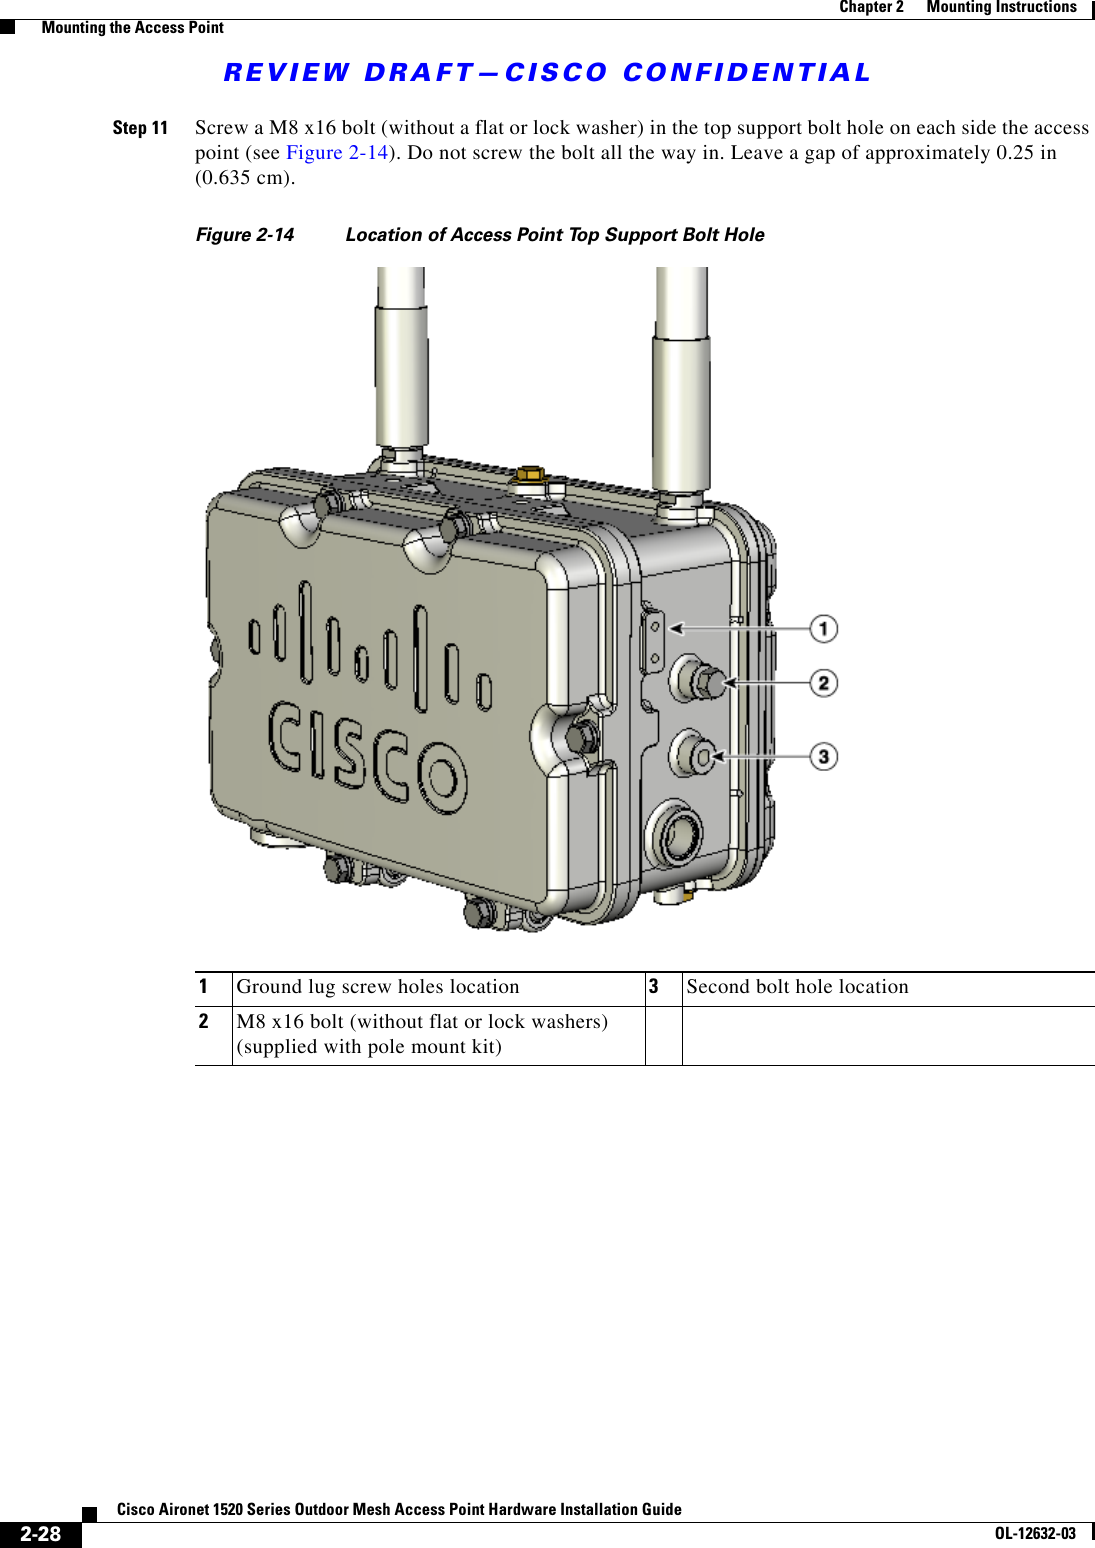 REVIEW DRAFT—CISCO CONFIDENTIAL2-28Cisco Aironet 1520 Series Outdoor Mesh Access Point Hardware Installation GuideOL-12632-03Chapter 2      Mounting Instructions  Mounting the Access PointStep 11 Screw a M8 x16 bolt (without a flat or lock washer) in the top support bolt hole on each side the access point (see Figure 2-14). Do not screw the bolt all the way in. Leave a gap of approximately 0.25 in  (0.635 cm).Figure 2-14 Location of Access Point Top Support Bolt Hole1Ground lug screw holes location 3Second bolt hole location2M8 x16 bolt (without flat or lock washers) (supplied with pole mount kit)